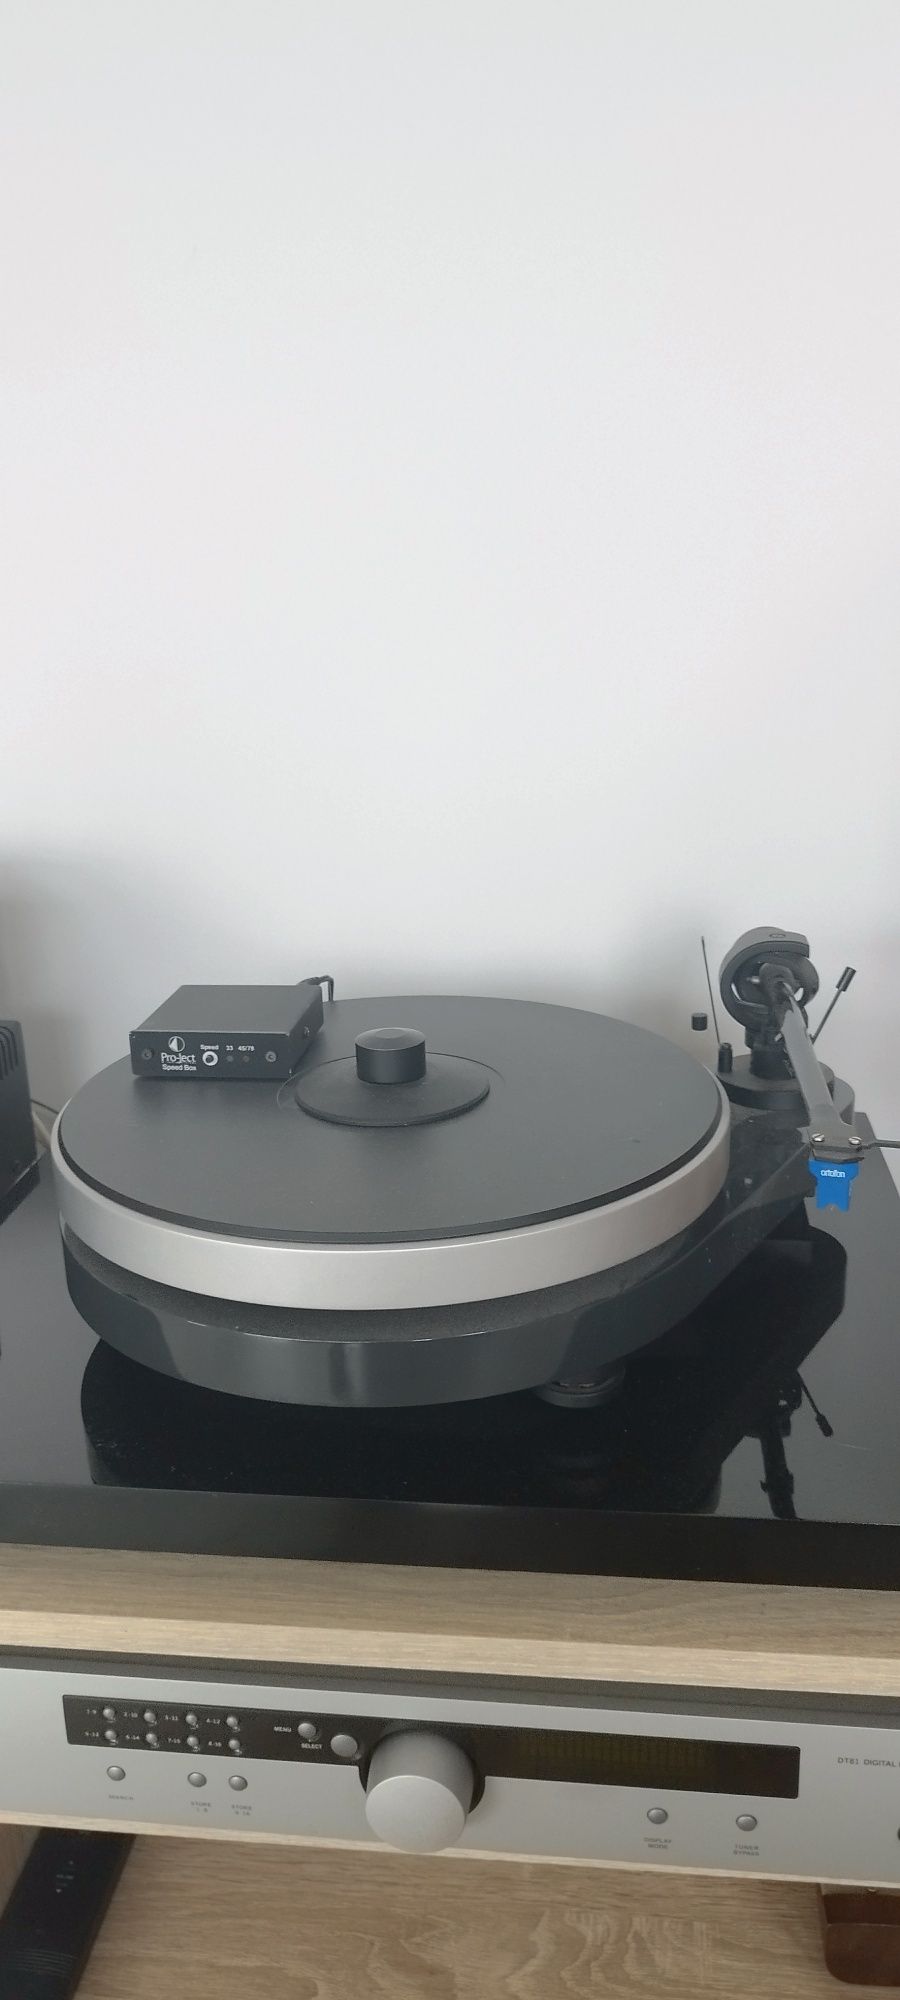 Pro-Ject RPM 5 Superpack